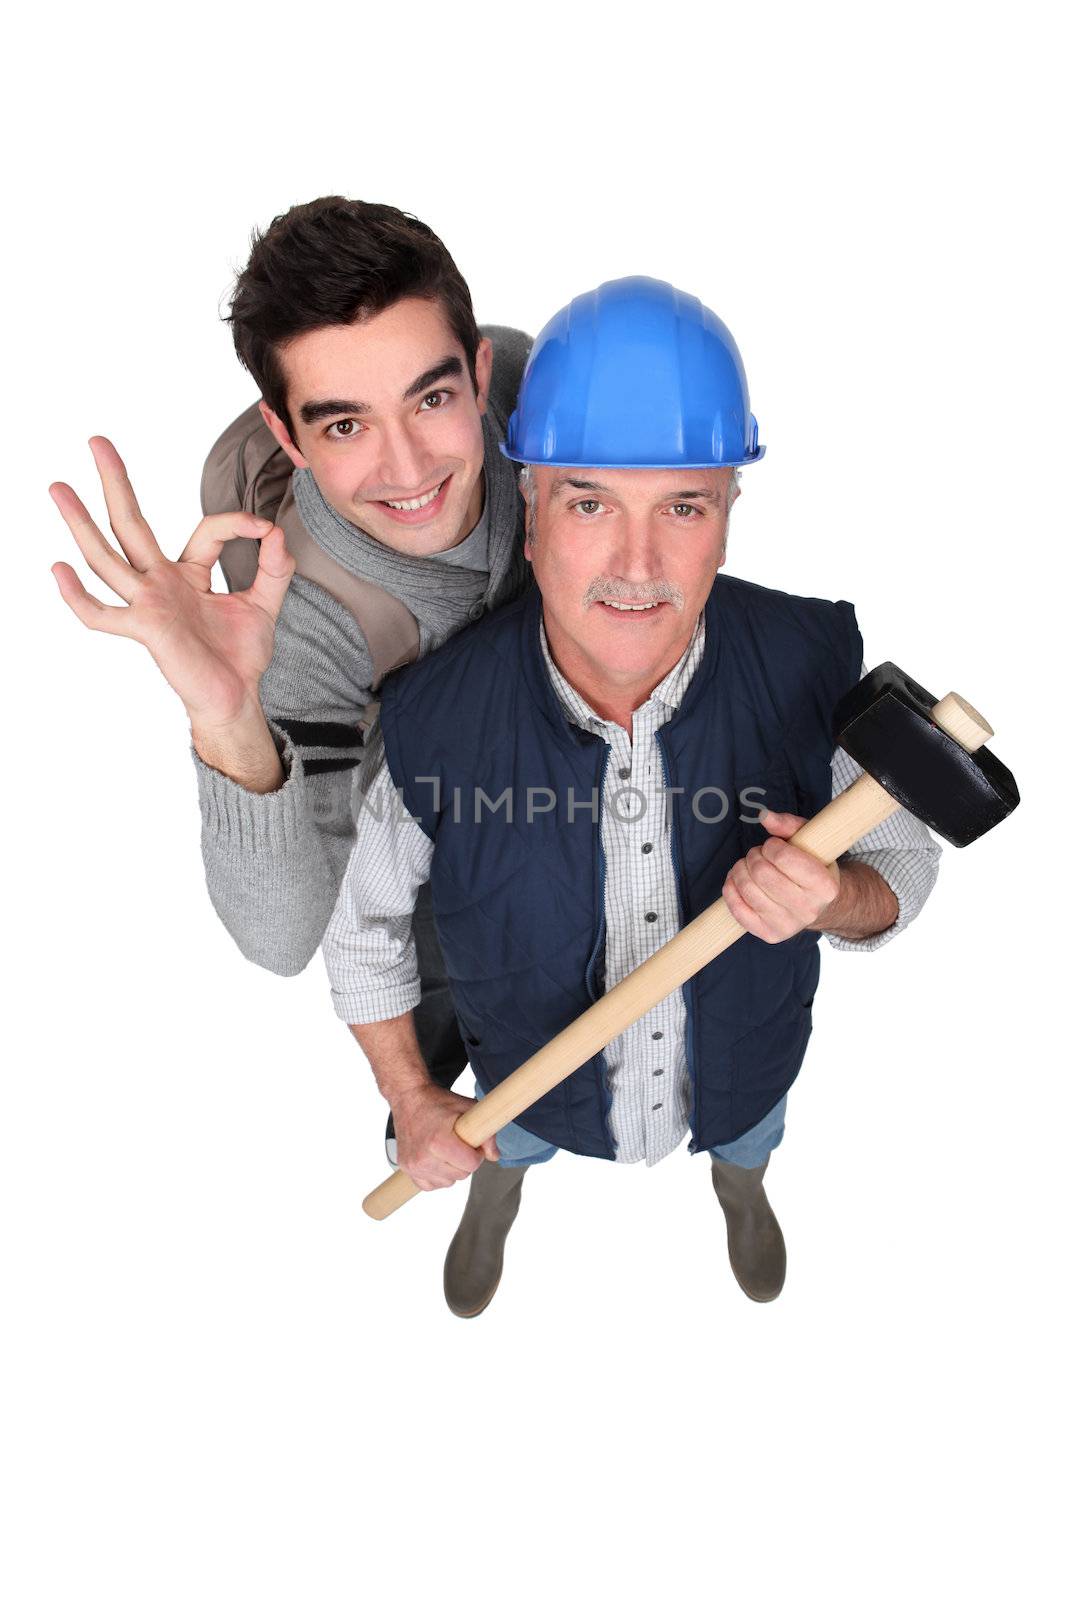 A handyman and his trainee. by phovoir